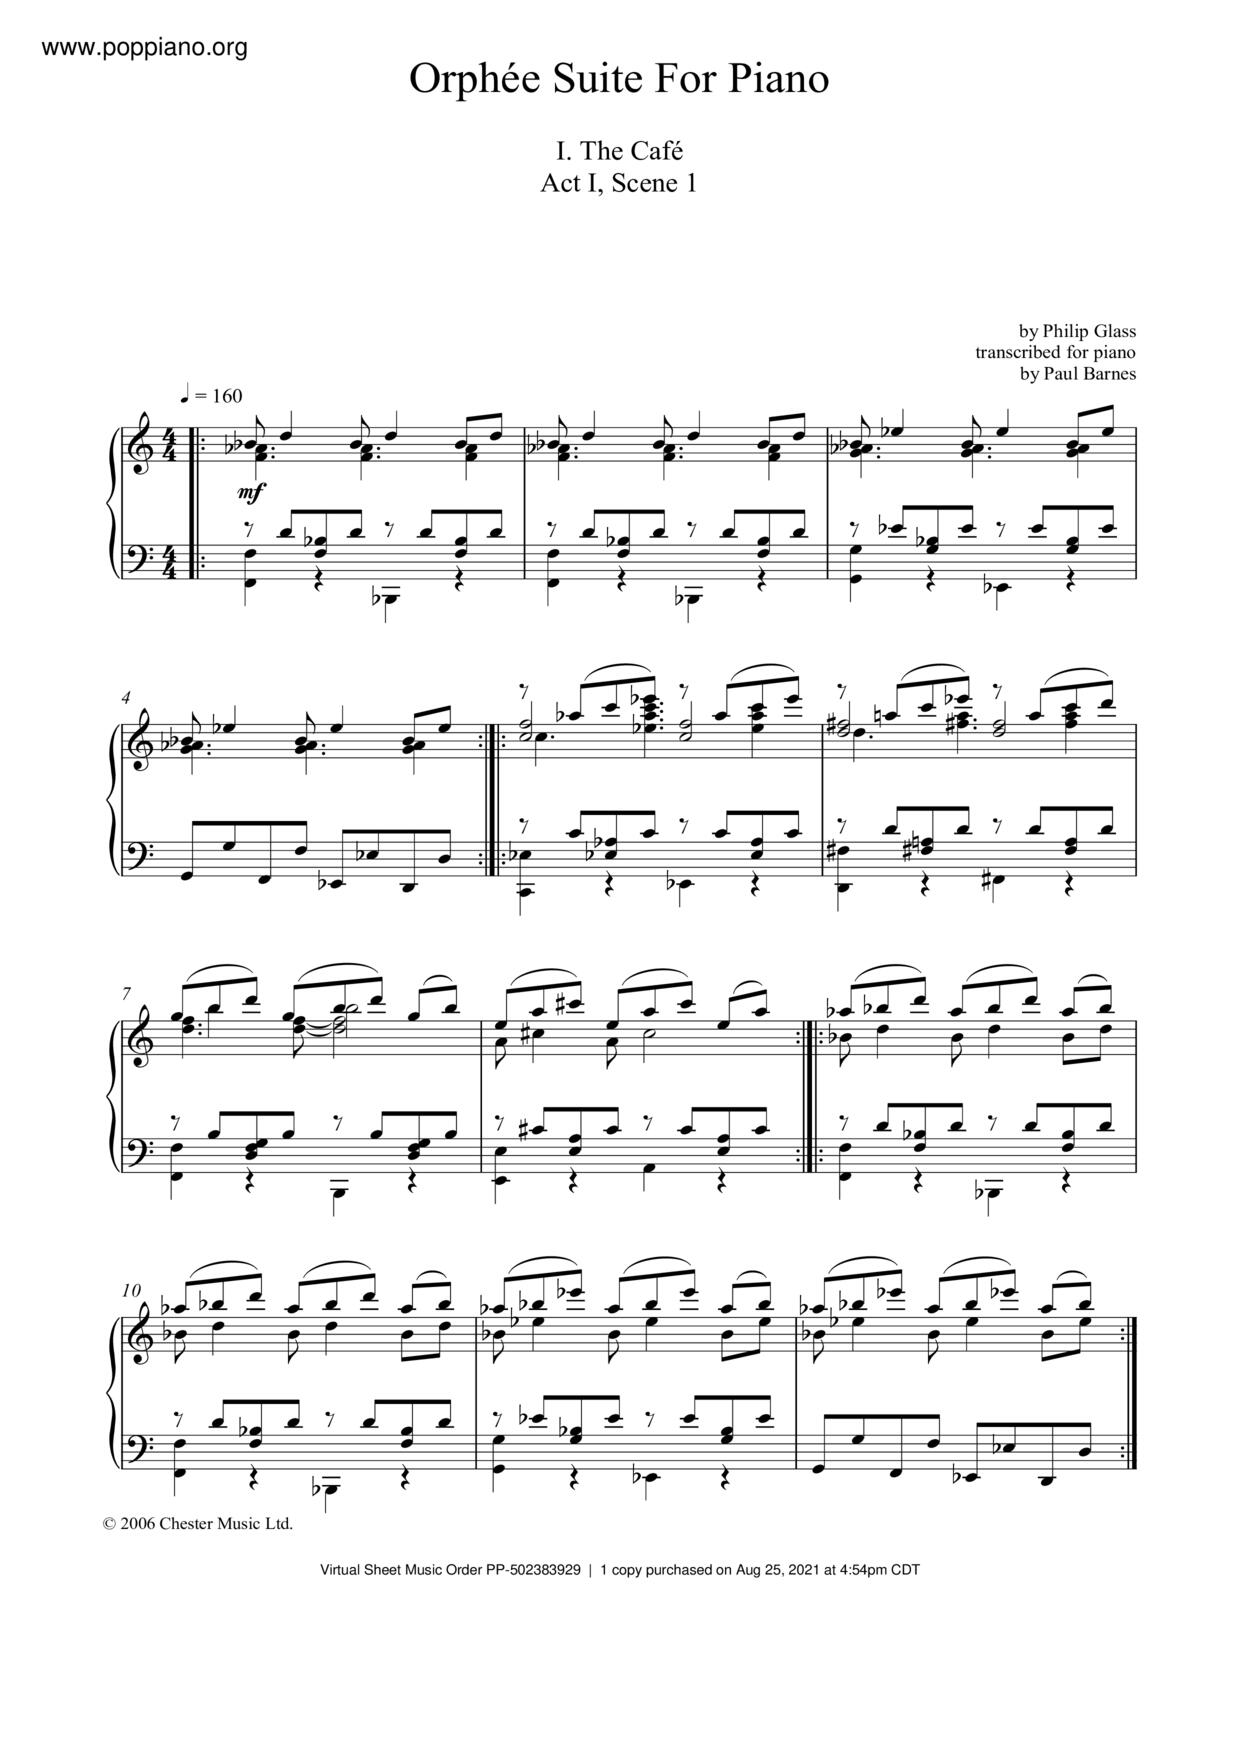 Orphee Suite For Piano, I. The Cafe, Act I, Scene 1ピアノ譜